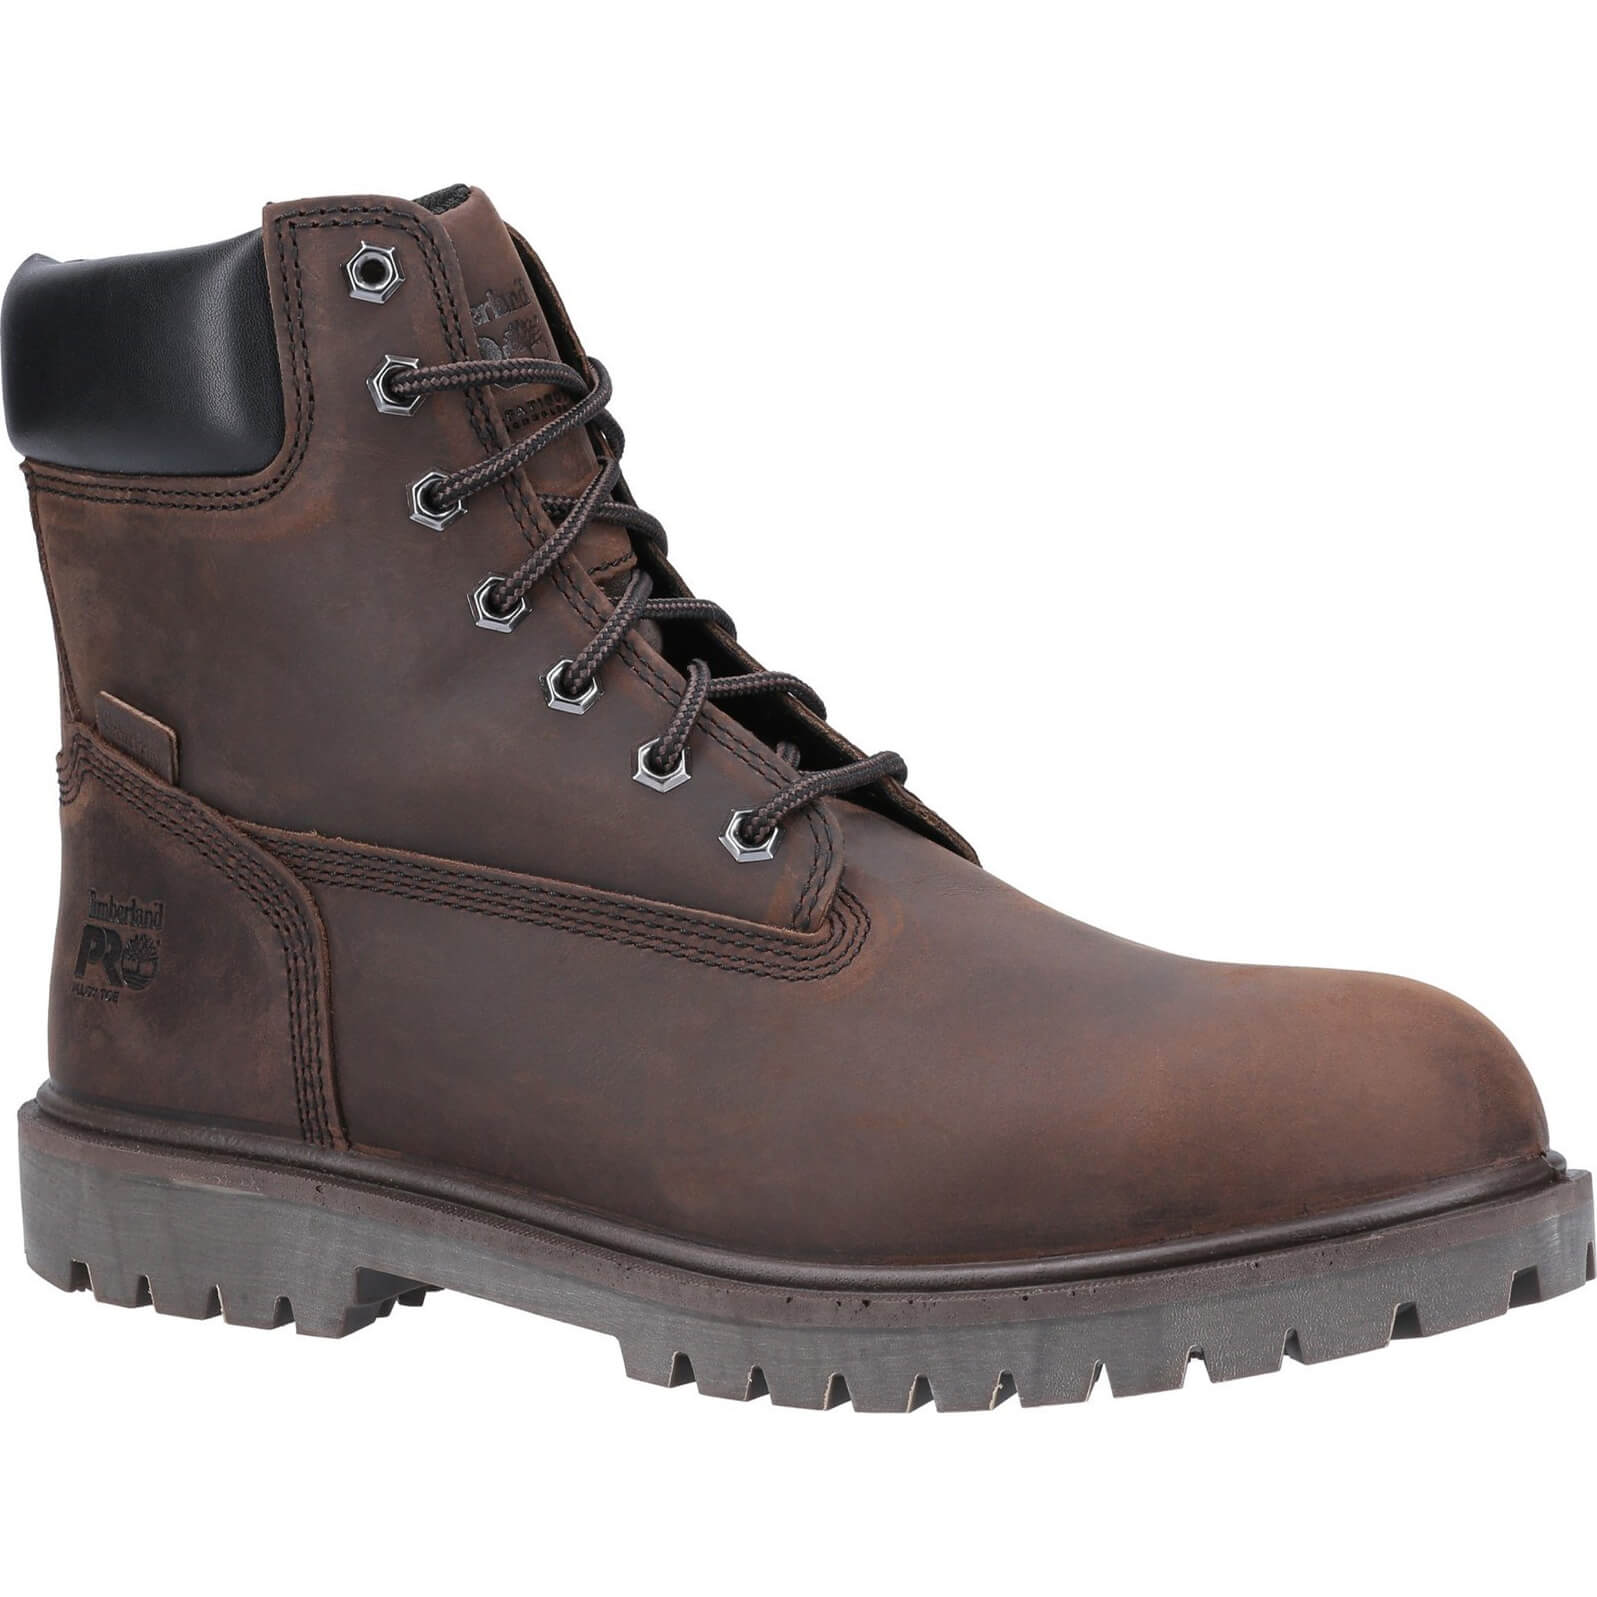 Image of Timberland Pro Iconic Safety Toe Work Boot Brown Size 9